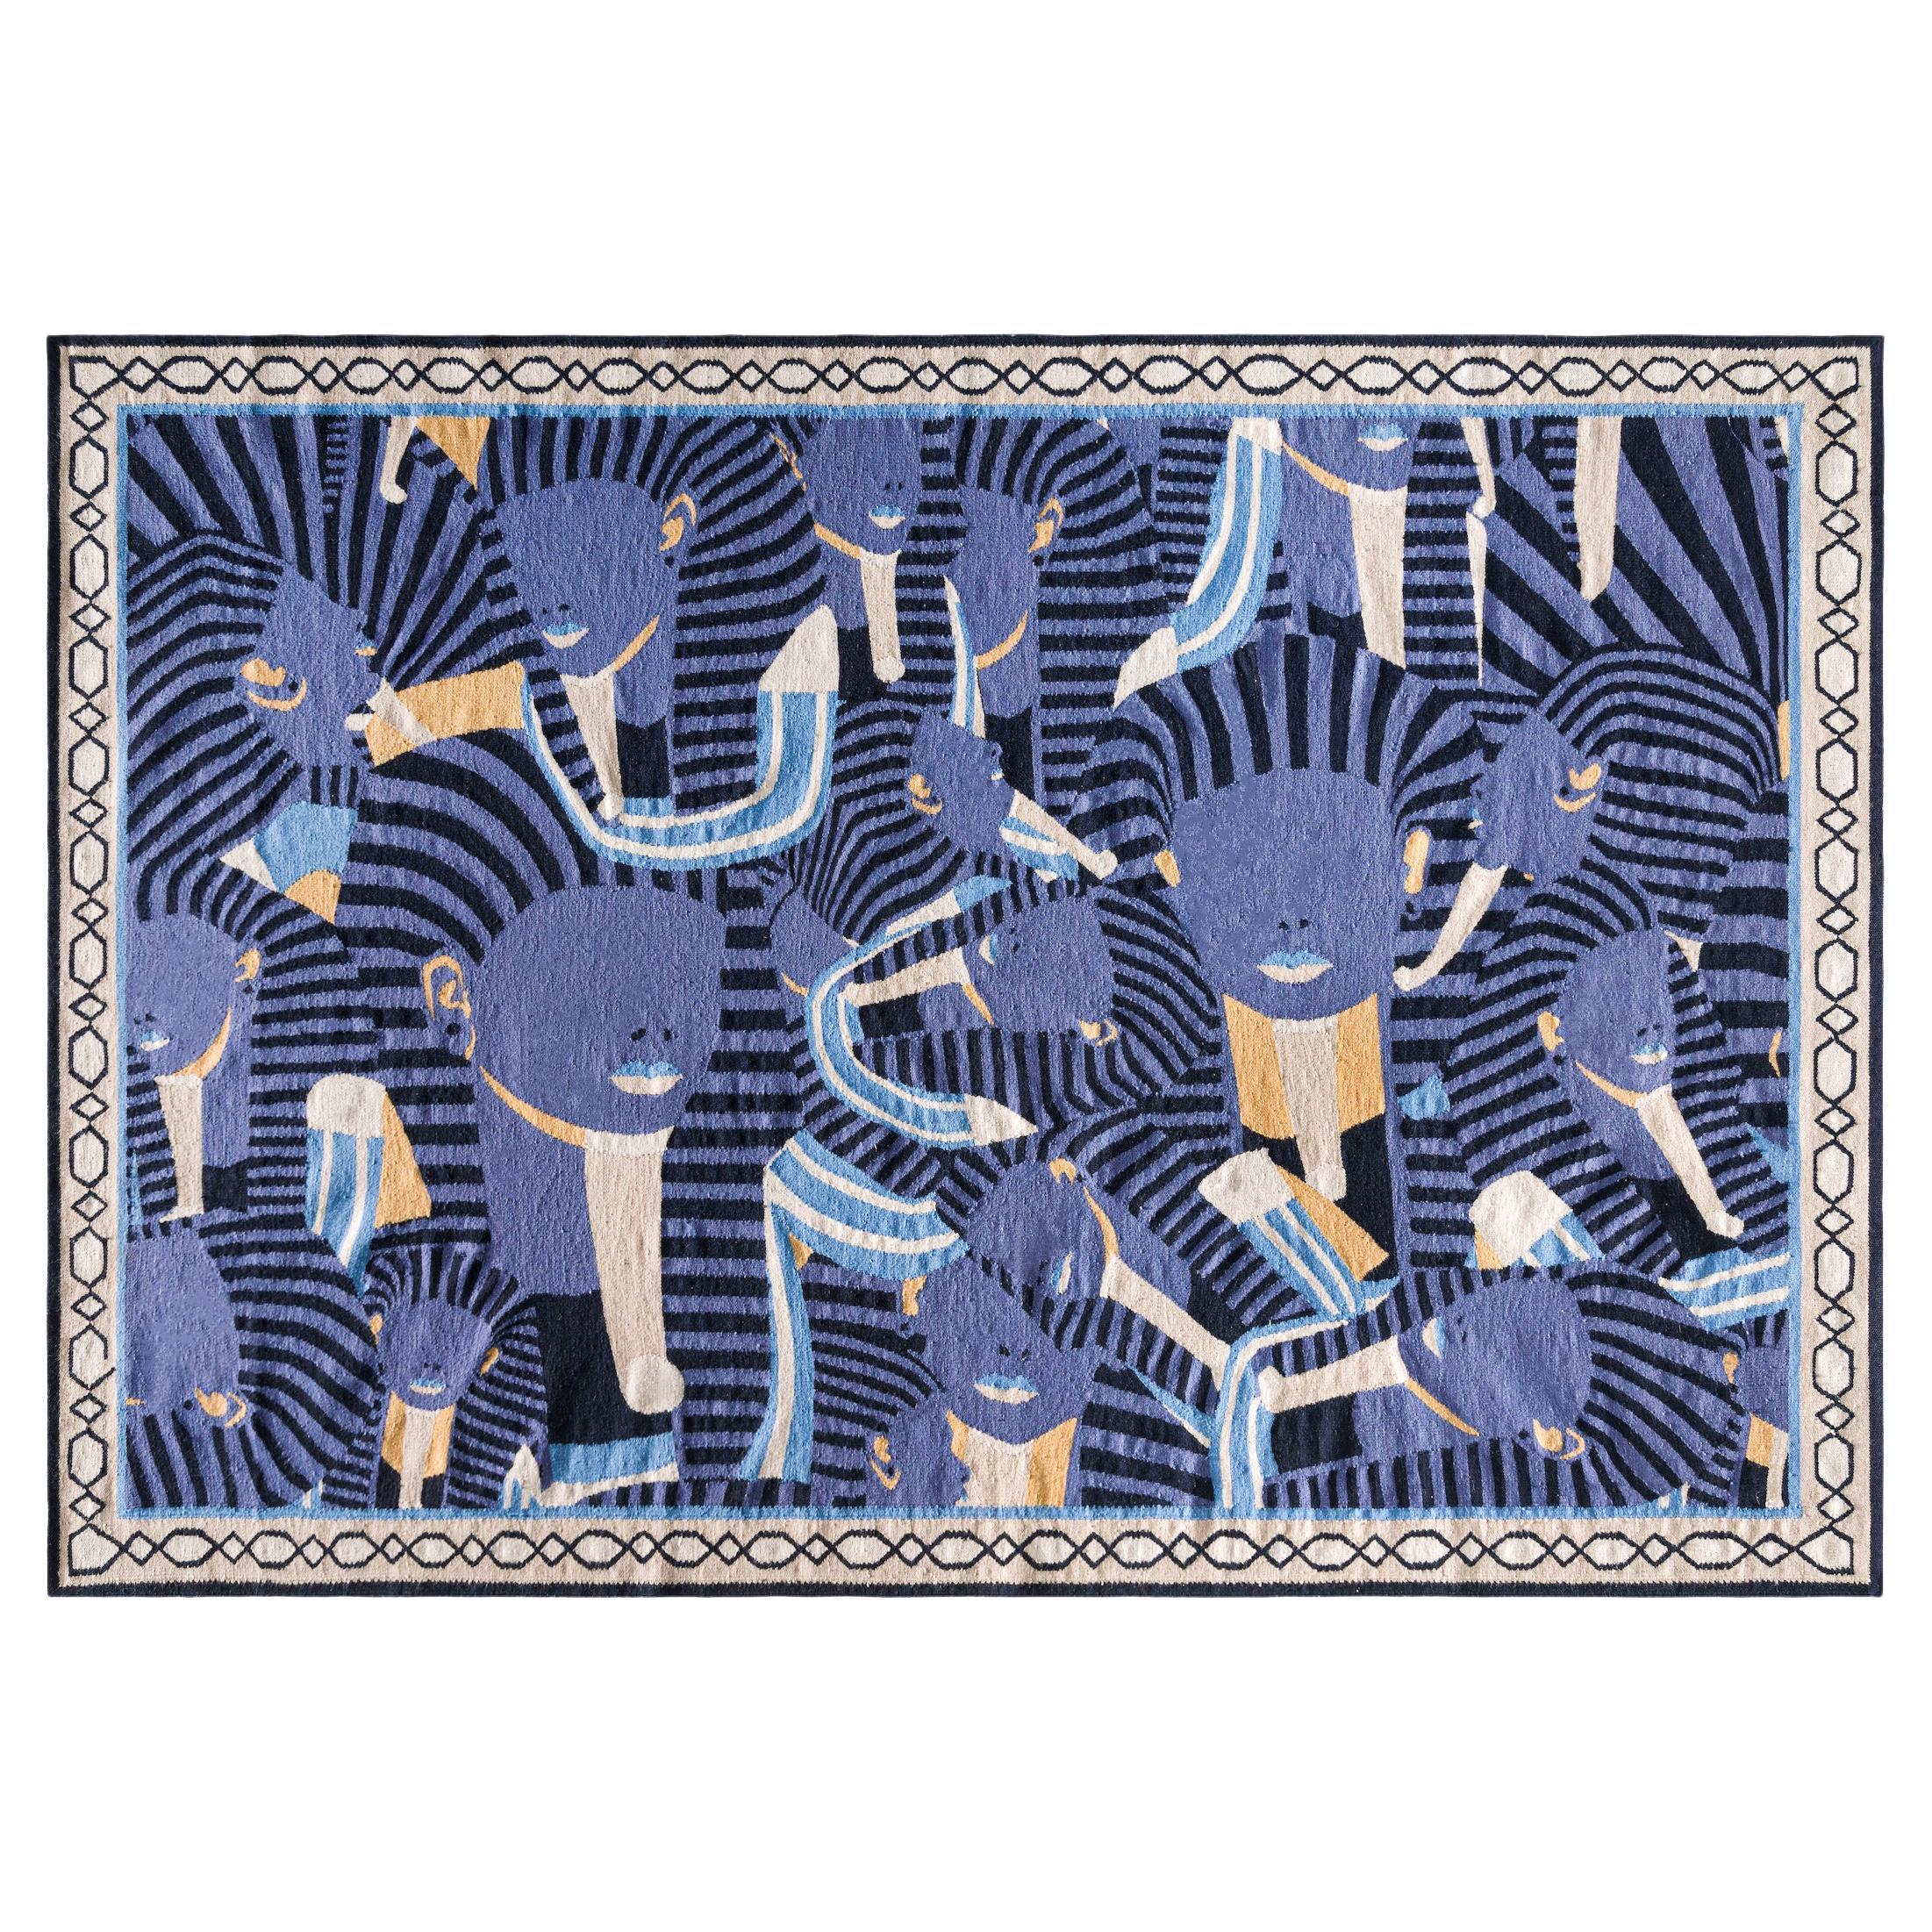 Kahhal Looms Swirling Legacy "Night" Hand-Woven Tapestry by Louis Barthélemy For Sale